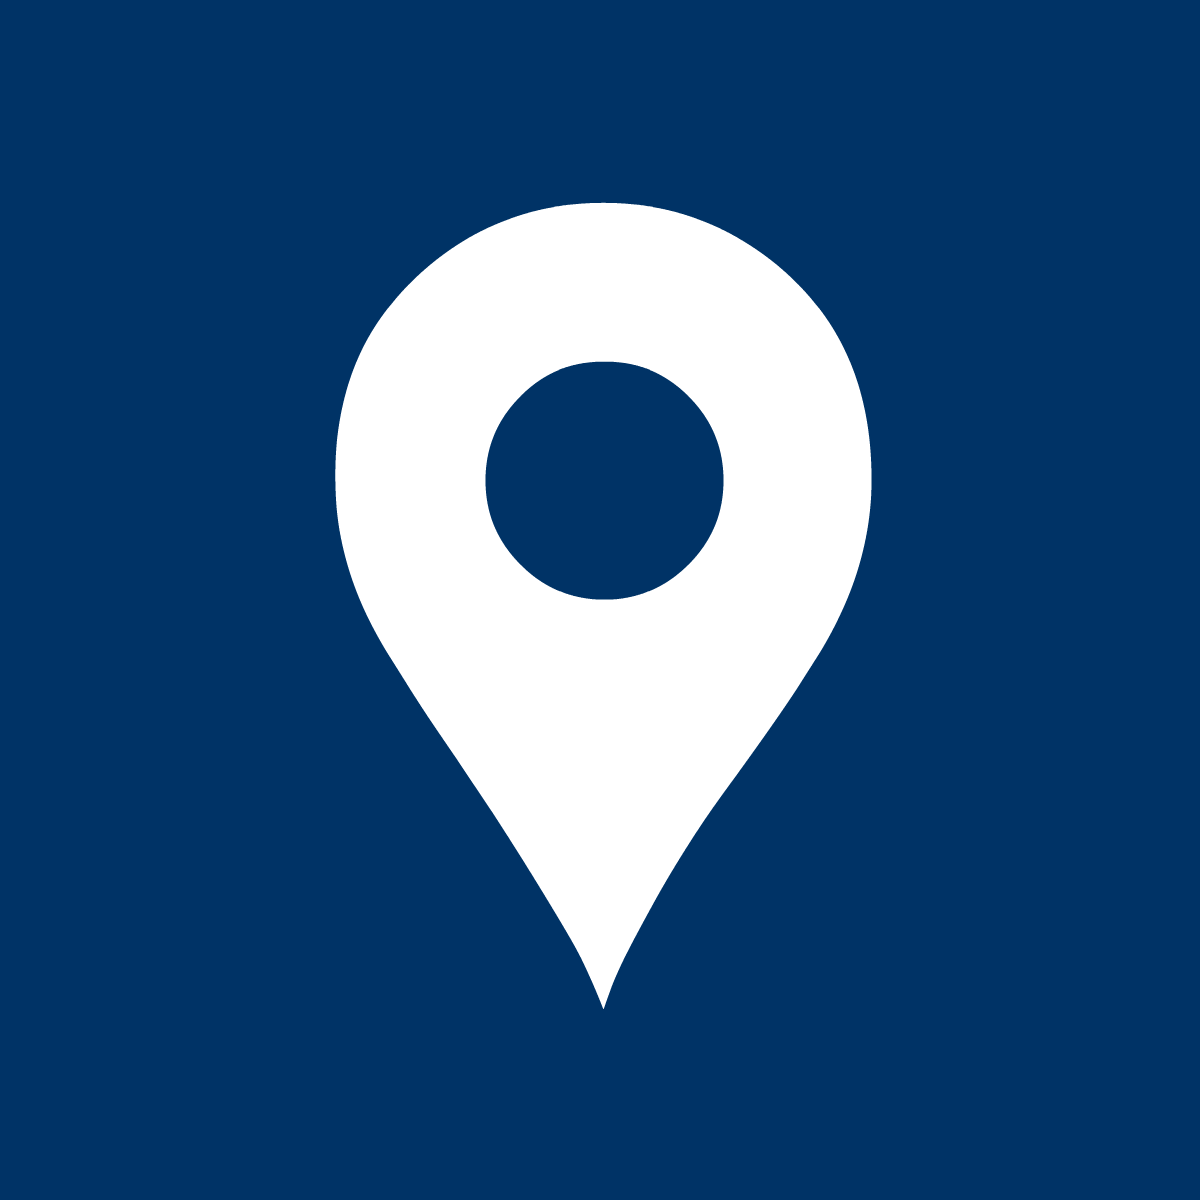 Hire Shopify Experts to integrate Mega Map â€‘ Store Locator app into a Shopify store